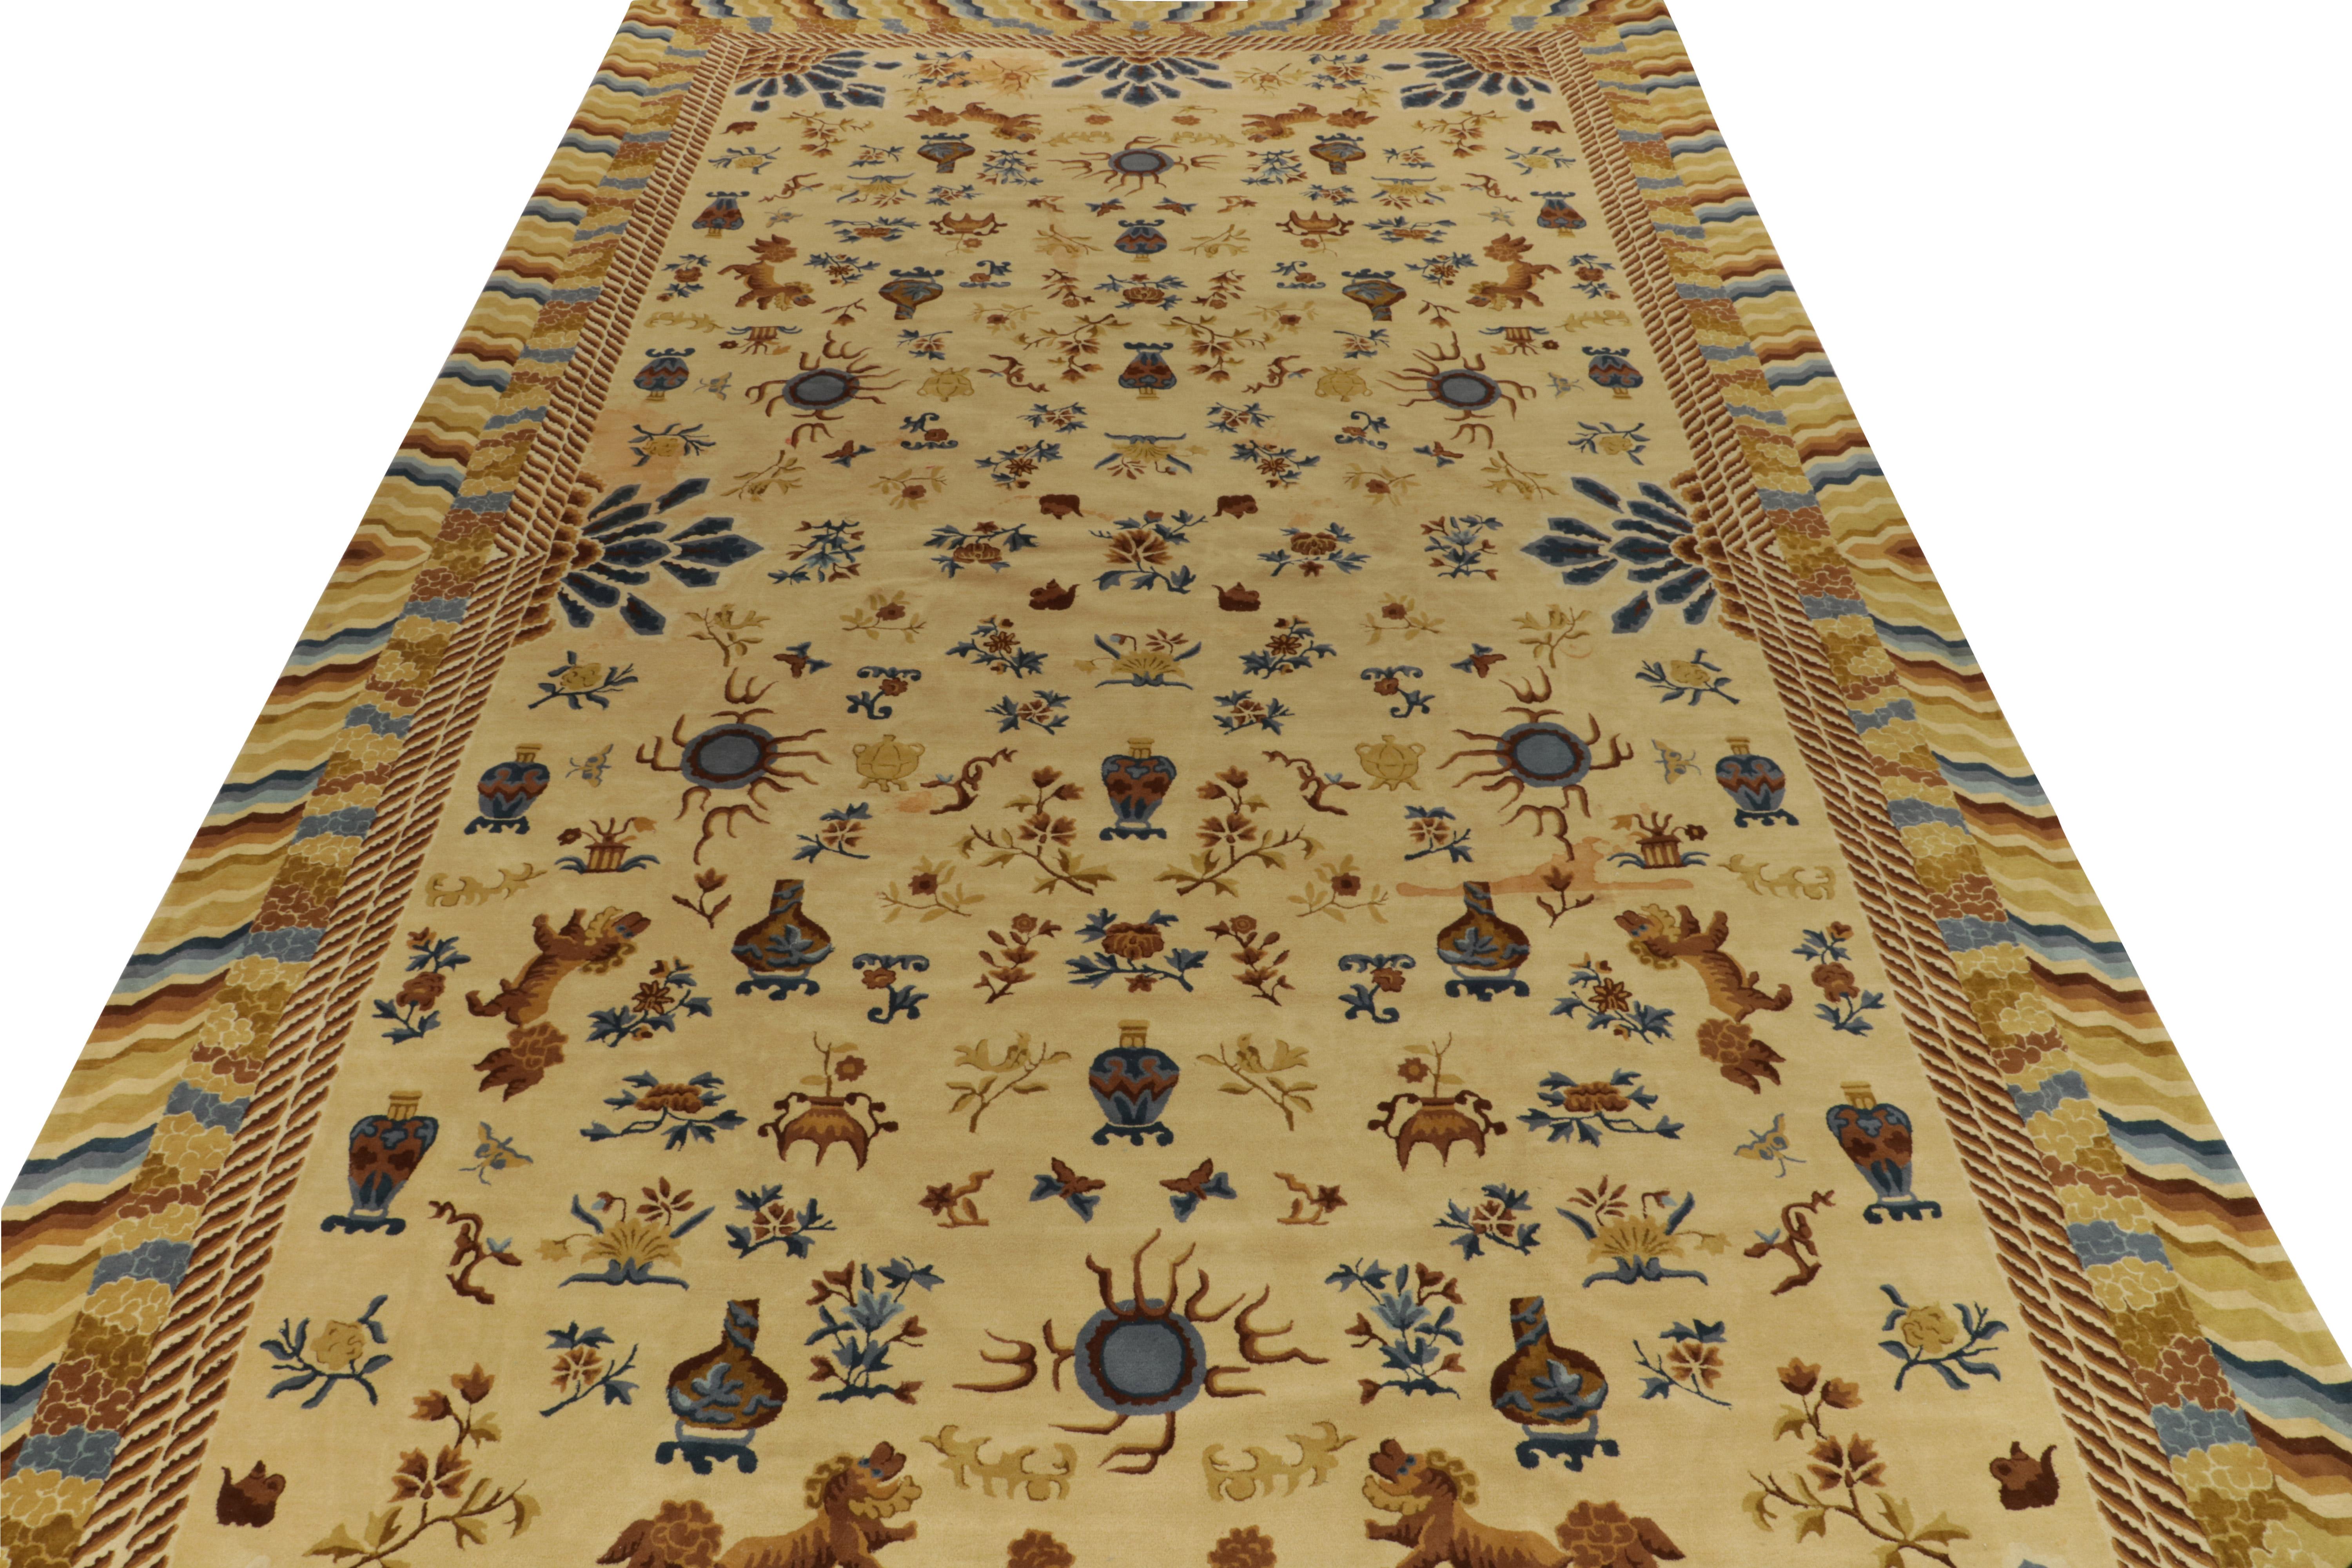 German Antique Hooked Rug Gold, Blue & Beige Chinese Pictorial Style by Rug & Kilim For Sale